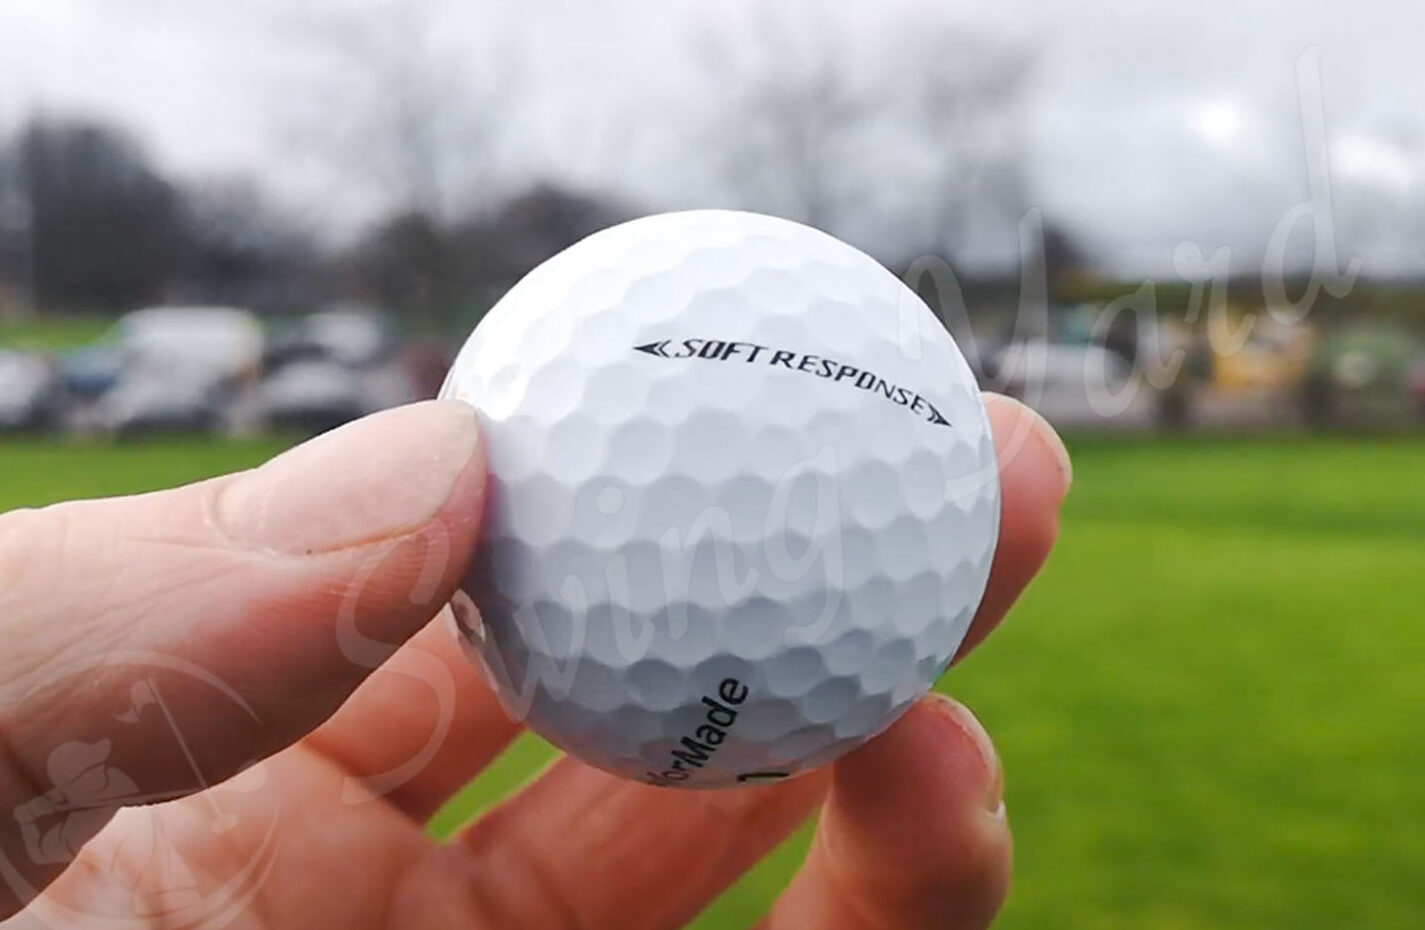 A TaylorMade Soft Response ball in my hand at the golf course